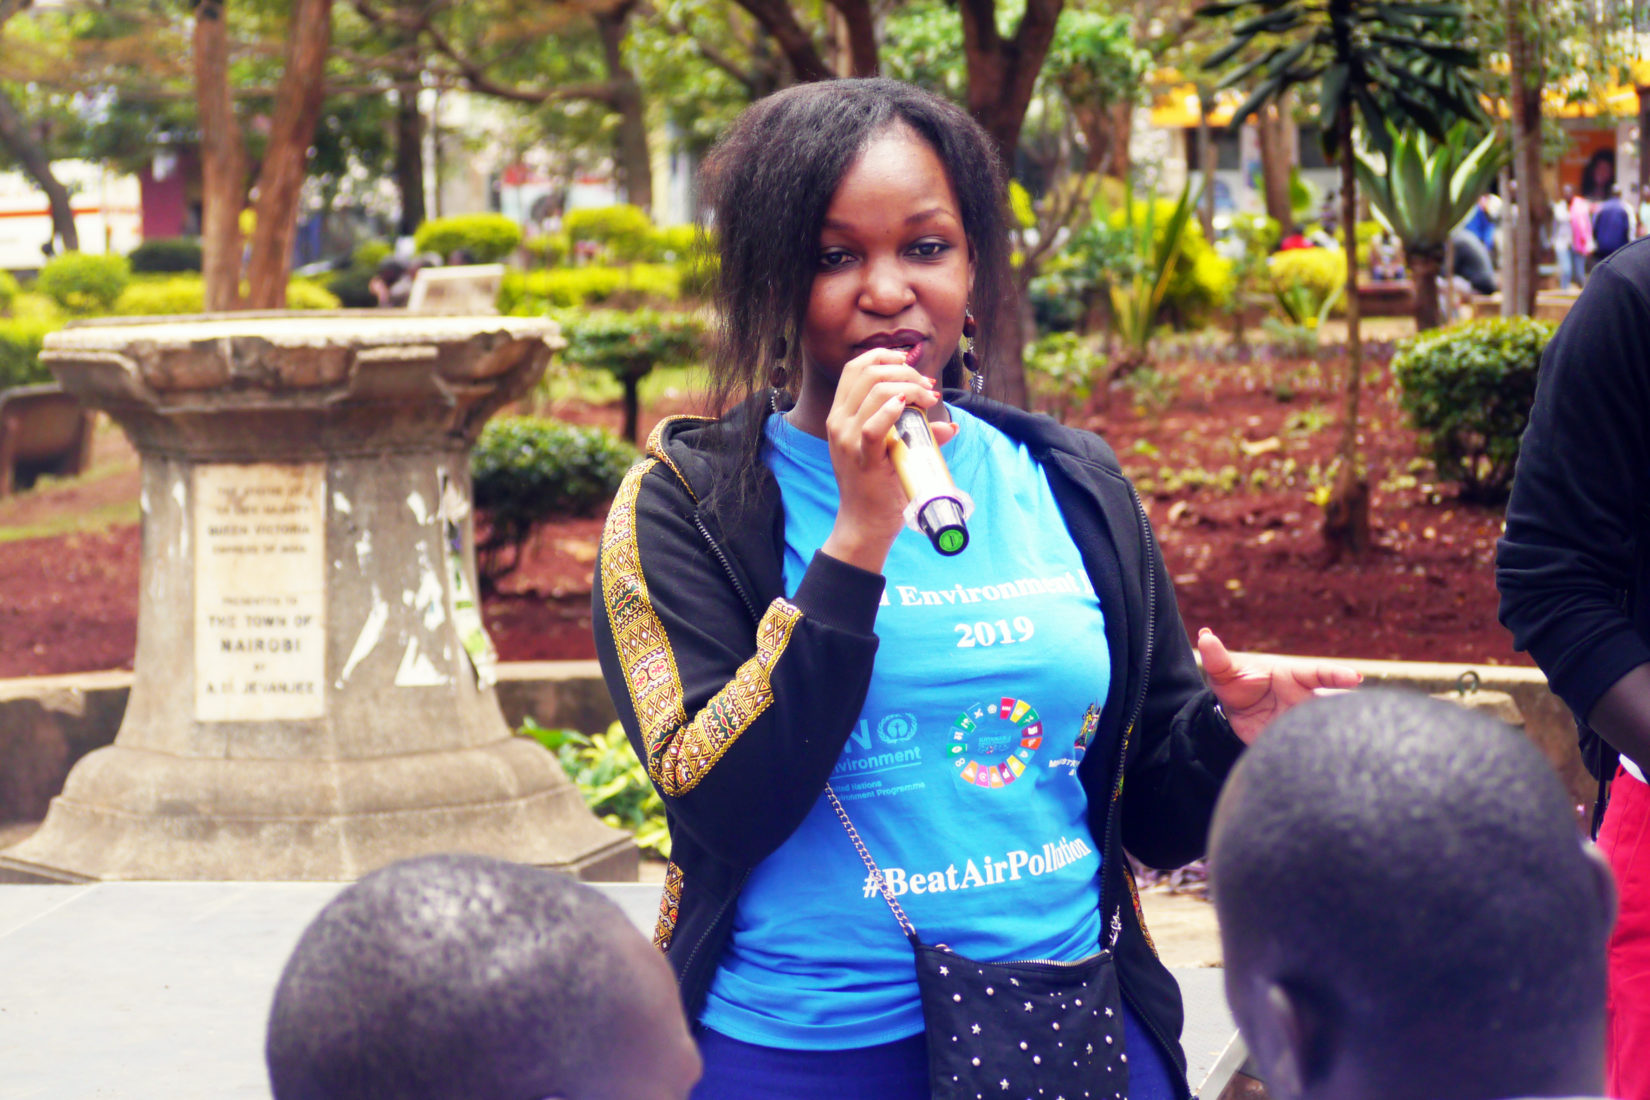 SI scholarship holder, Judith Achieng’ Oginga, is talking in front of some persons.